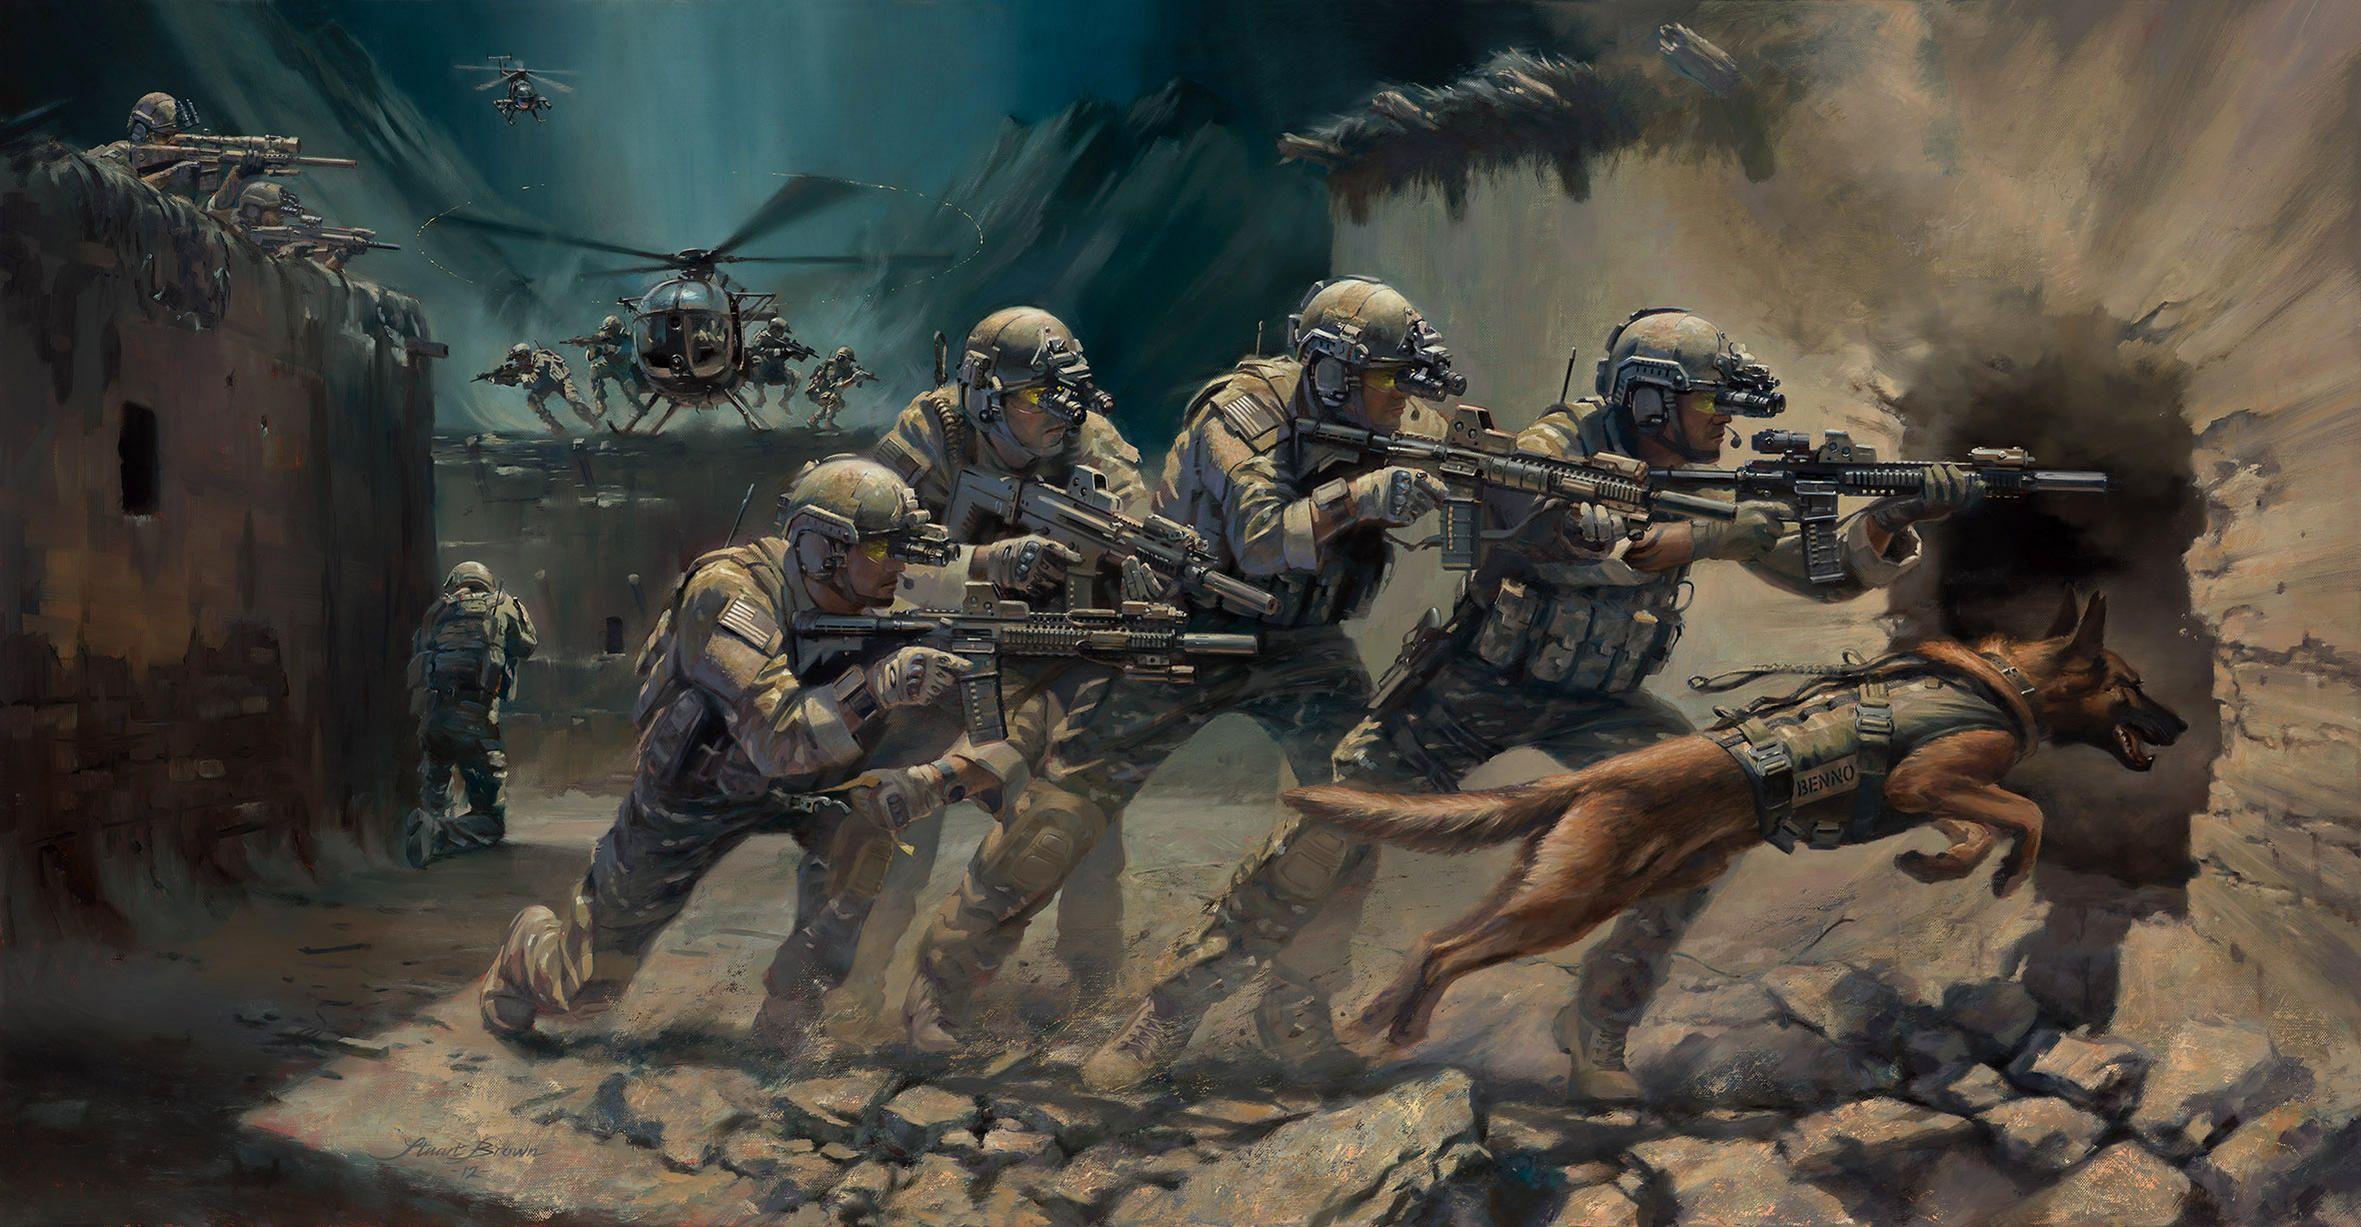 Download wallpaper art, soldiers, special forces, assault rifles